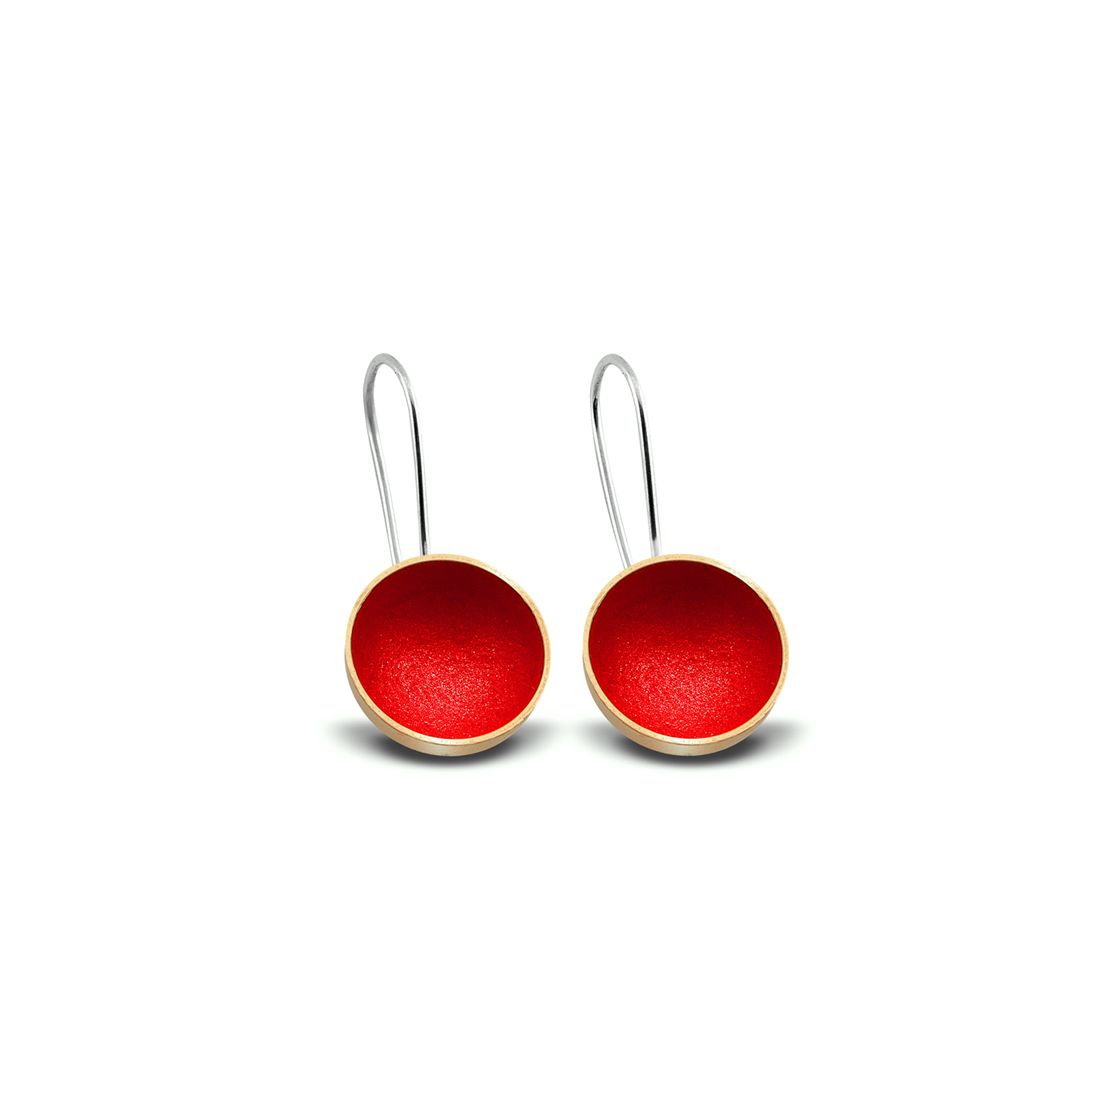 Red-pigmented gold half moons on silver dangle earrings.